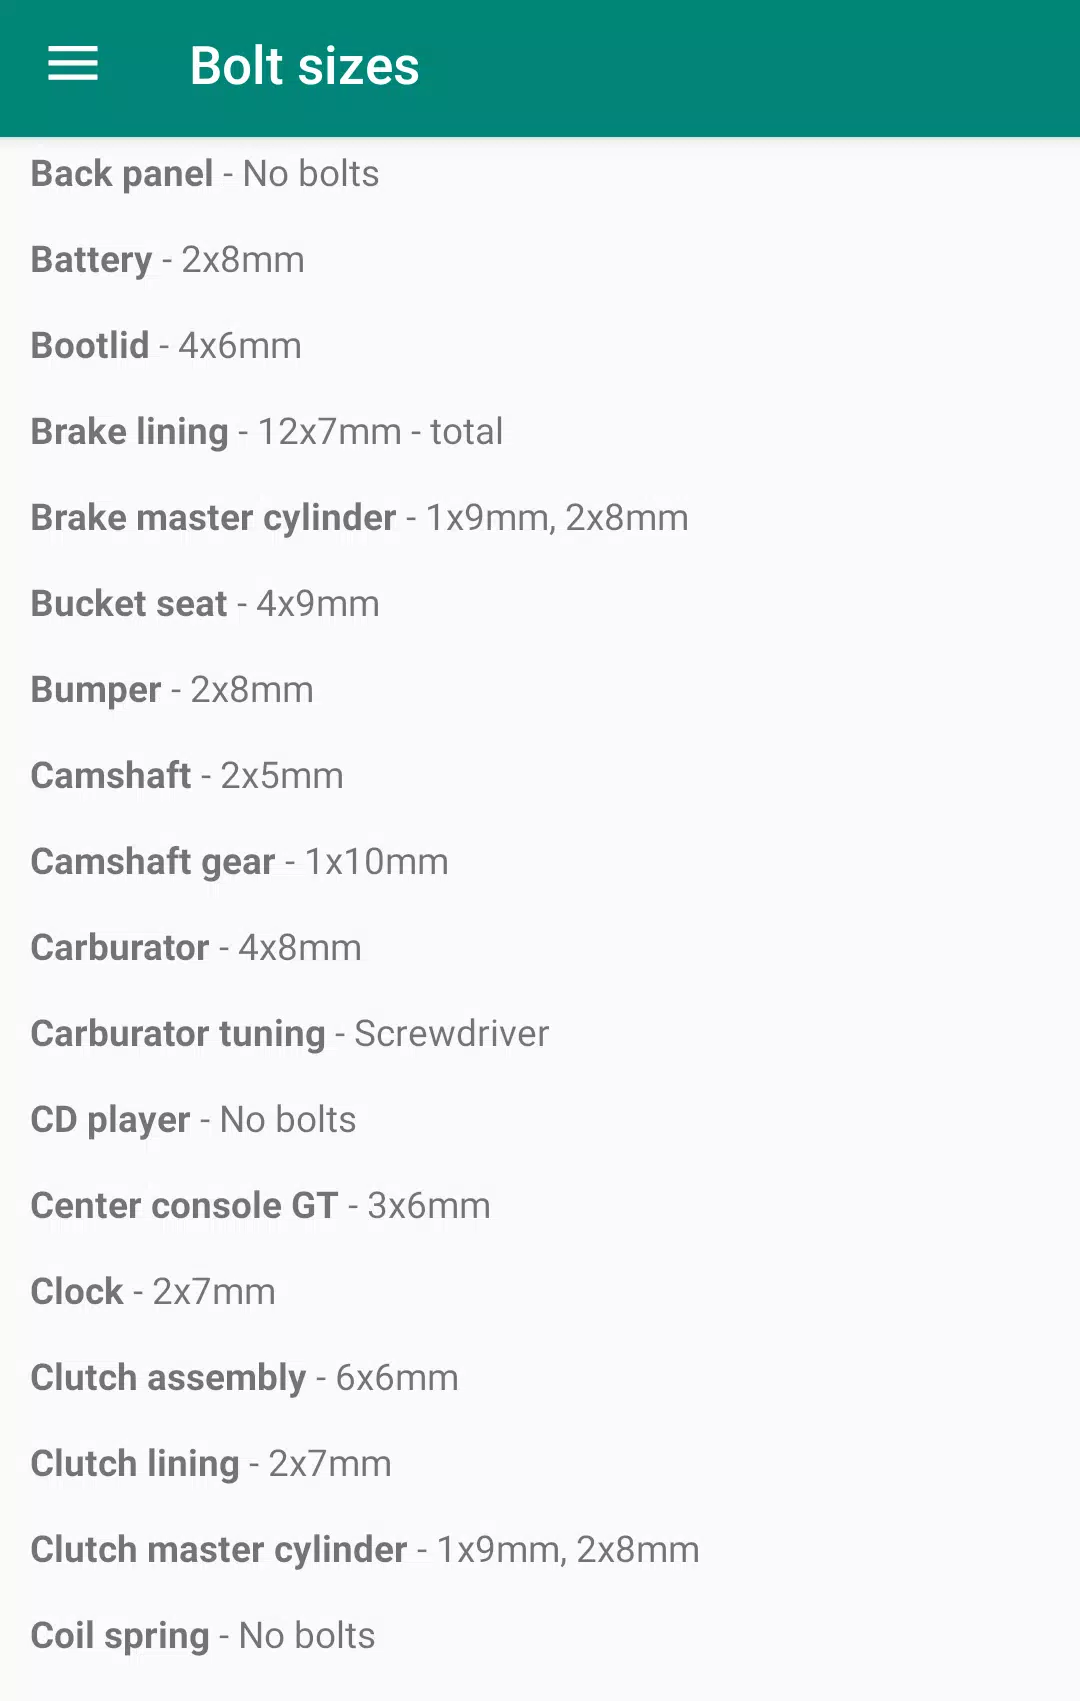 My Summer Car Manual for Android - Download